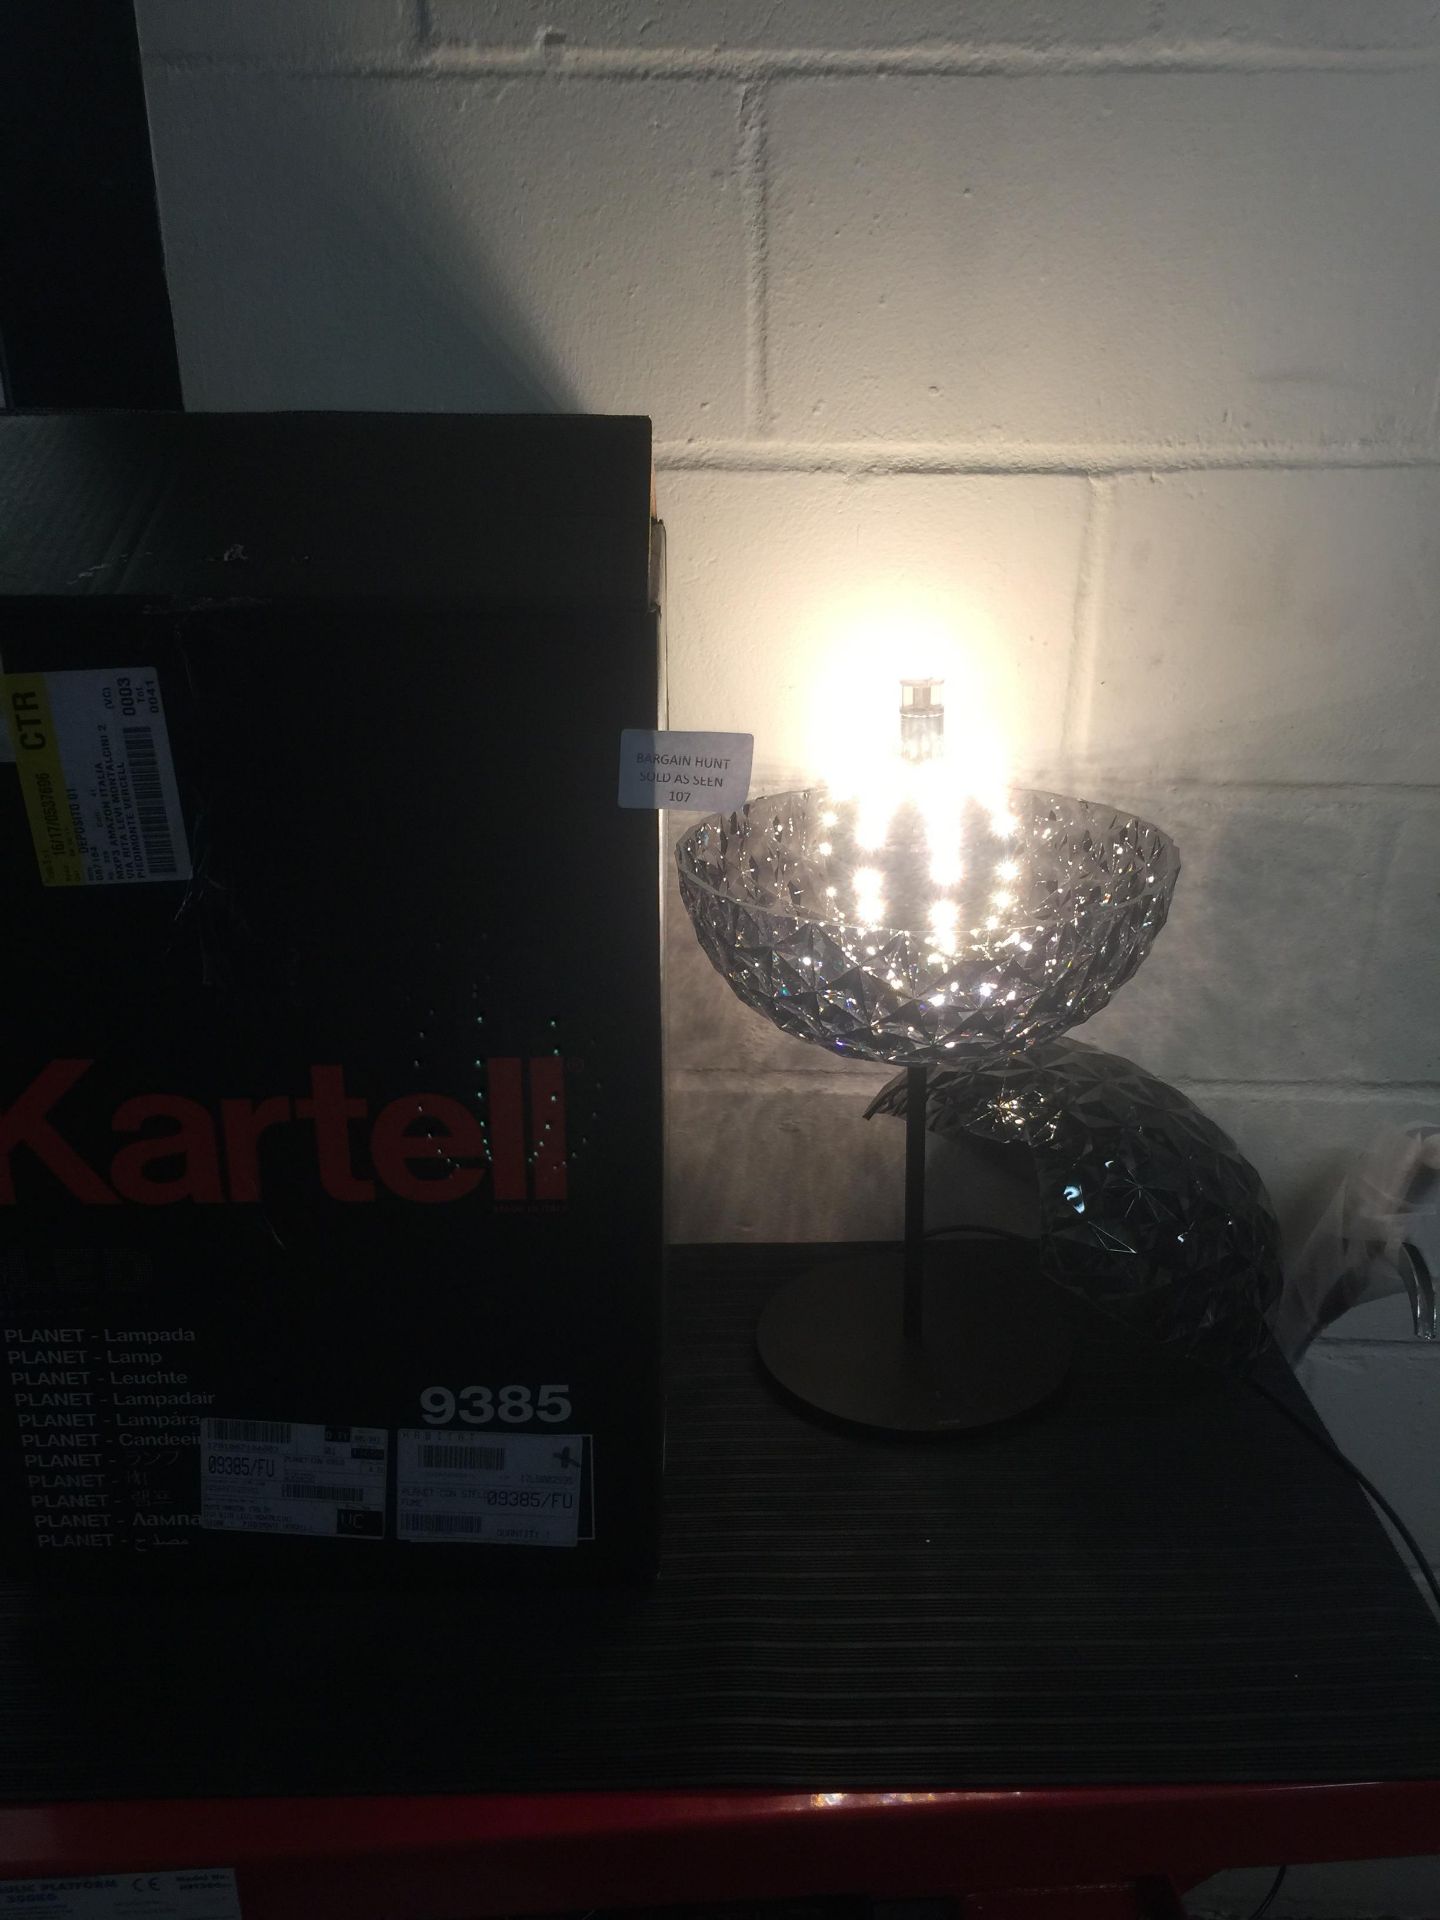 Planet LED Table Lamp RRP £409.99 (Broken Top Cover) - Image 2 of 2